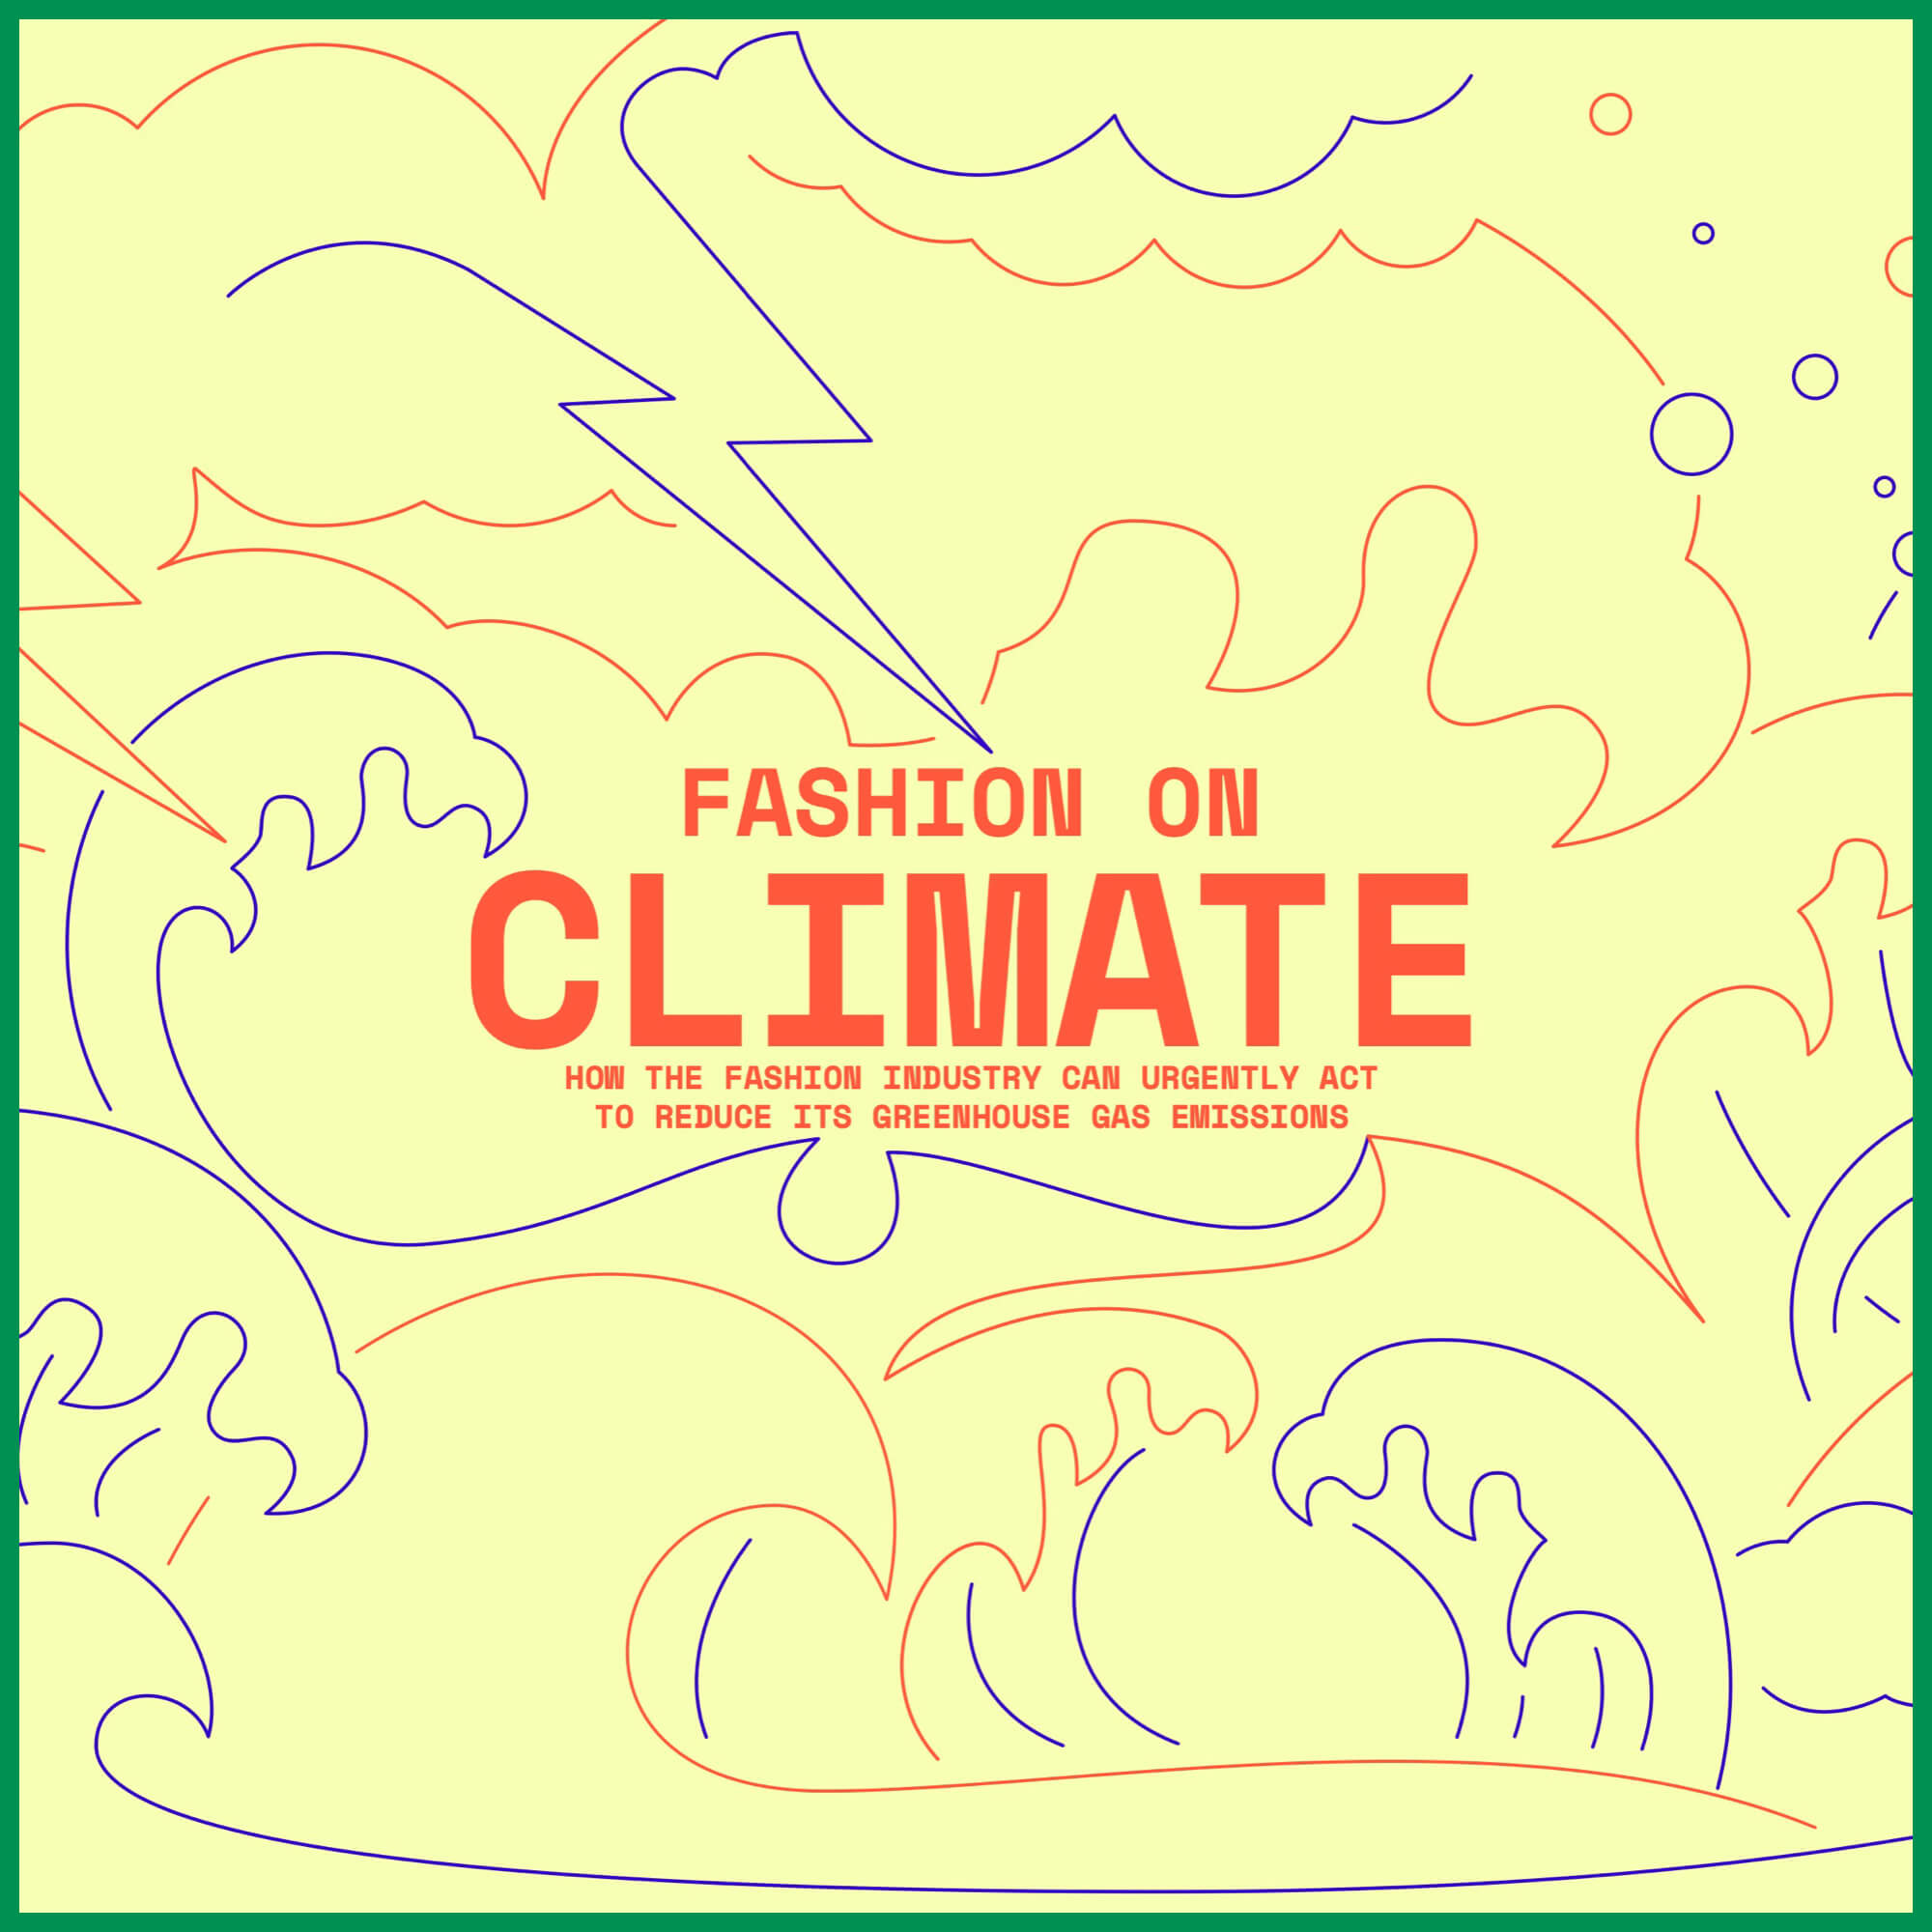 <Fashion on Climate> Report - published by Global Fashion Agenda with Mckinsey & Company